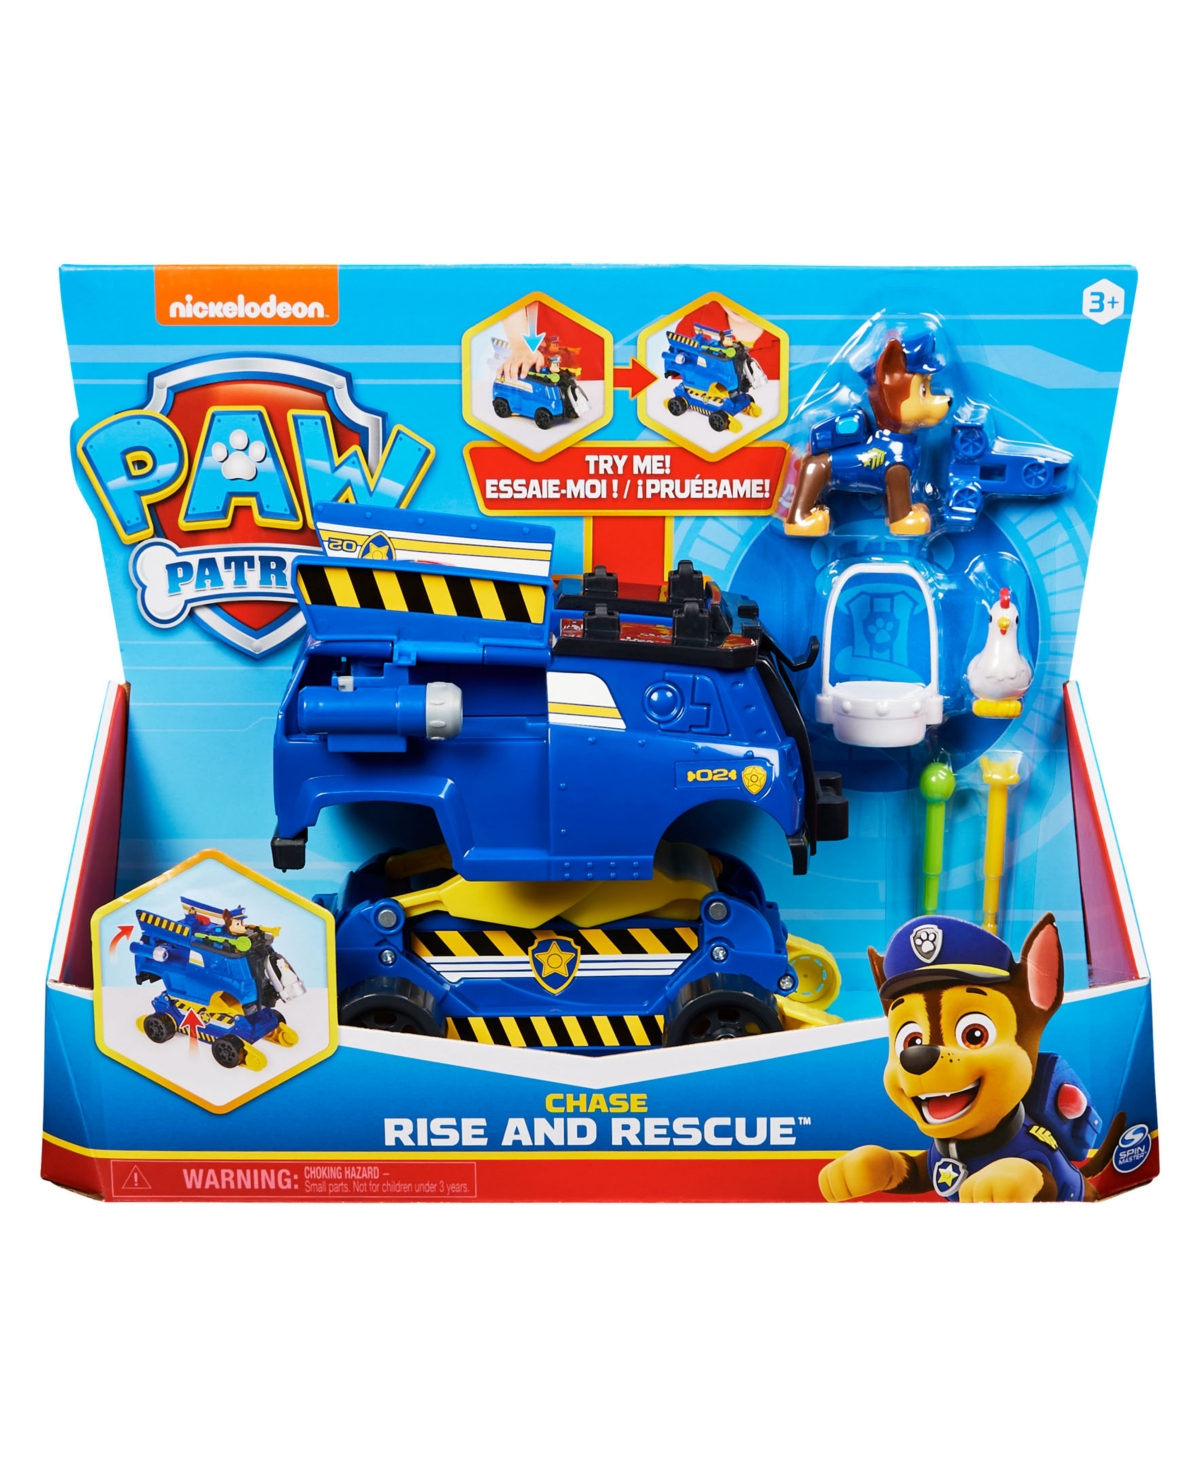 Paw Patrol Babies' Chase Rise And Rescue Changing Toy Car With Action Figures And Accessories In Multi-color